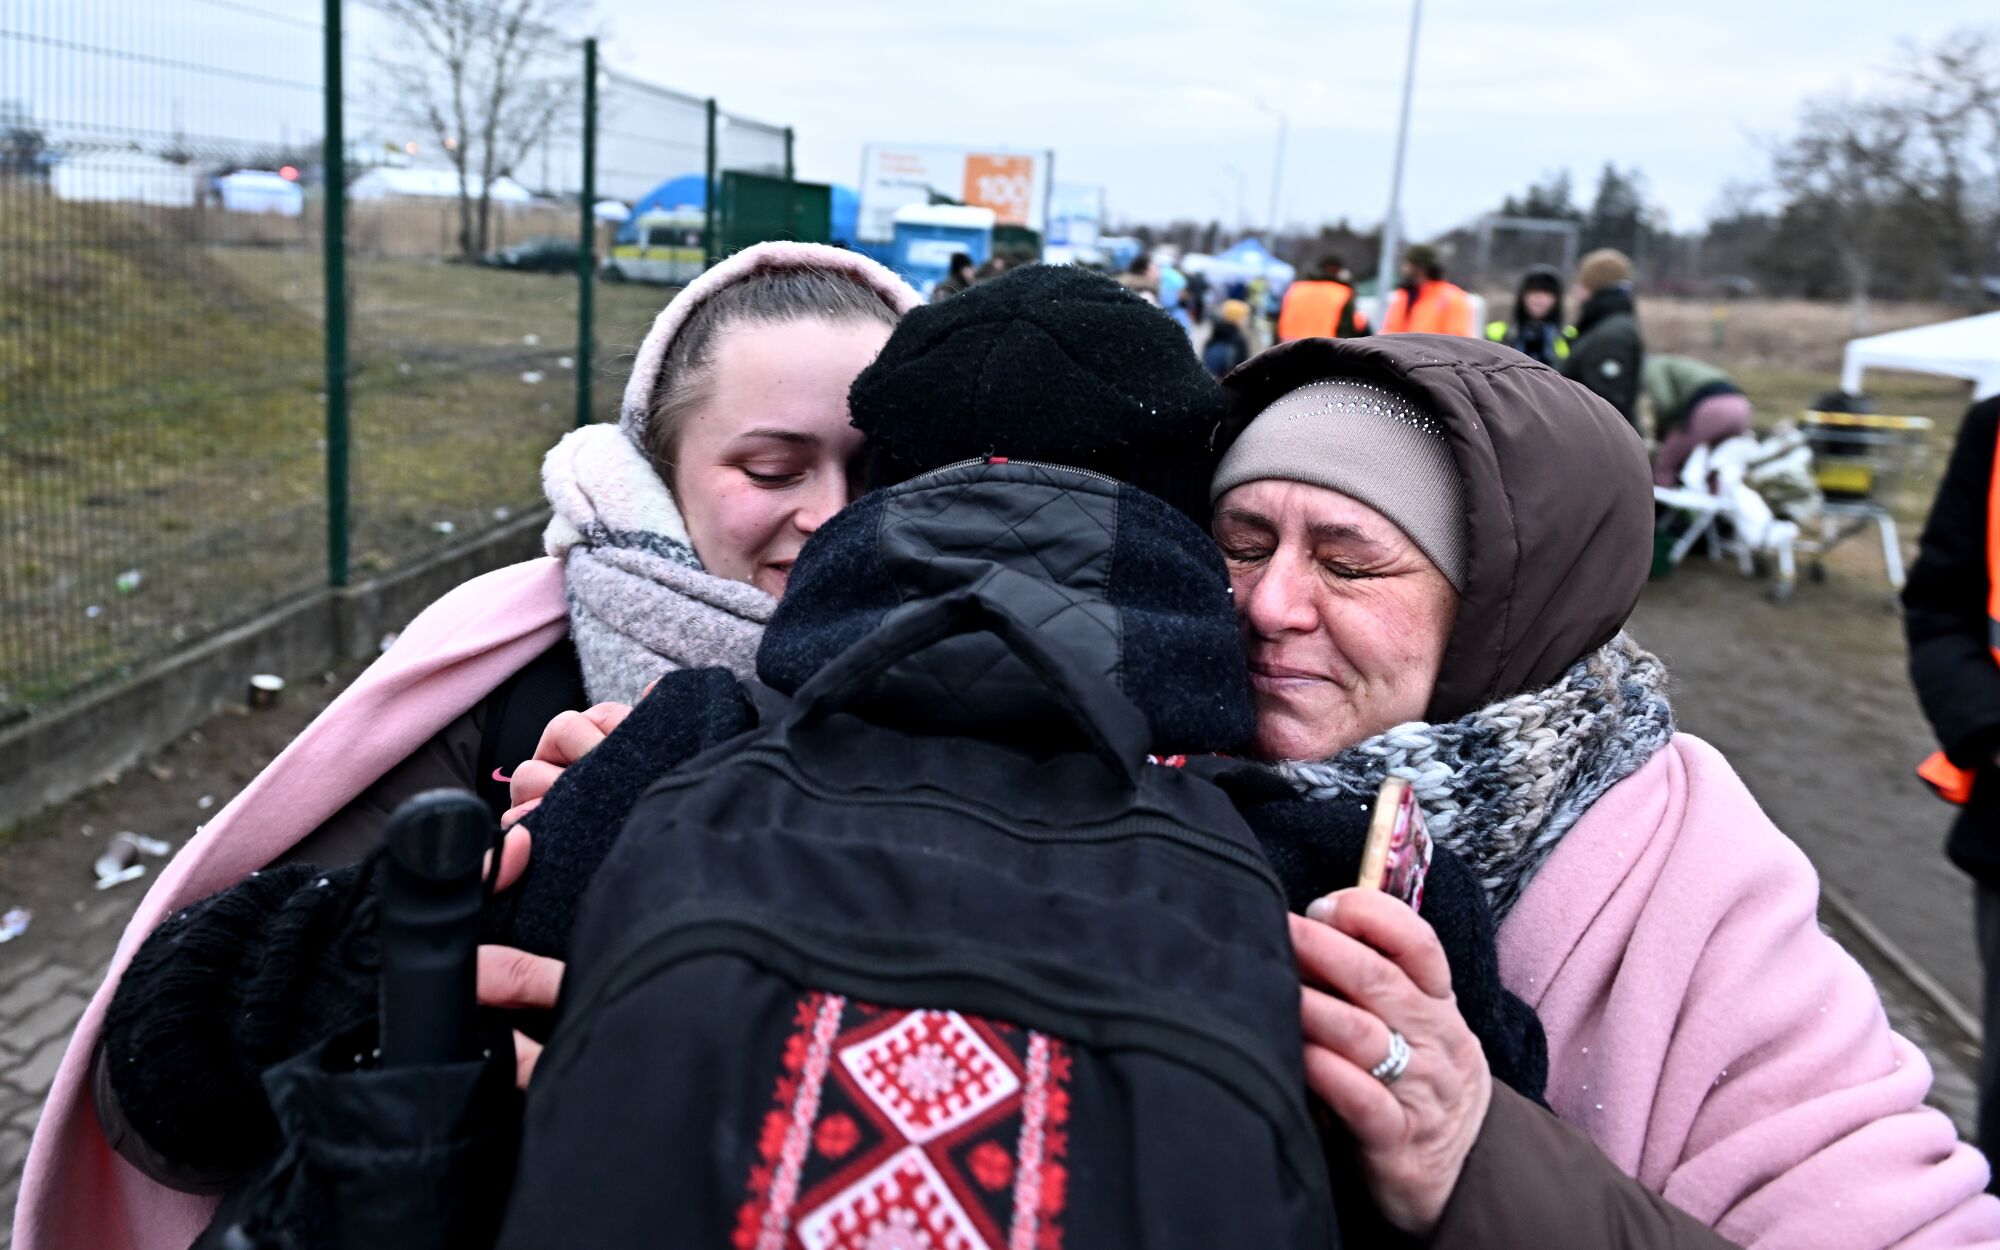 Ukrainian refugee Orest Hromnadzkiy gets a hug from his sister Yuliia and mother Alla after he crossed the border in Poland.